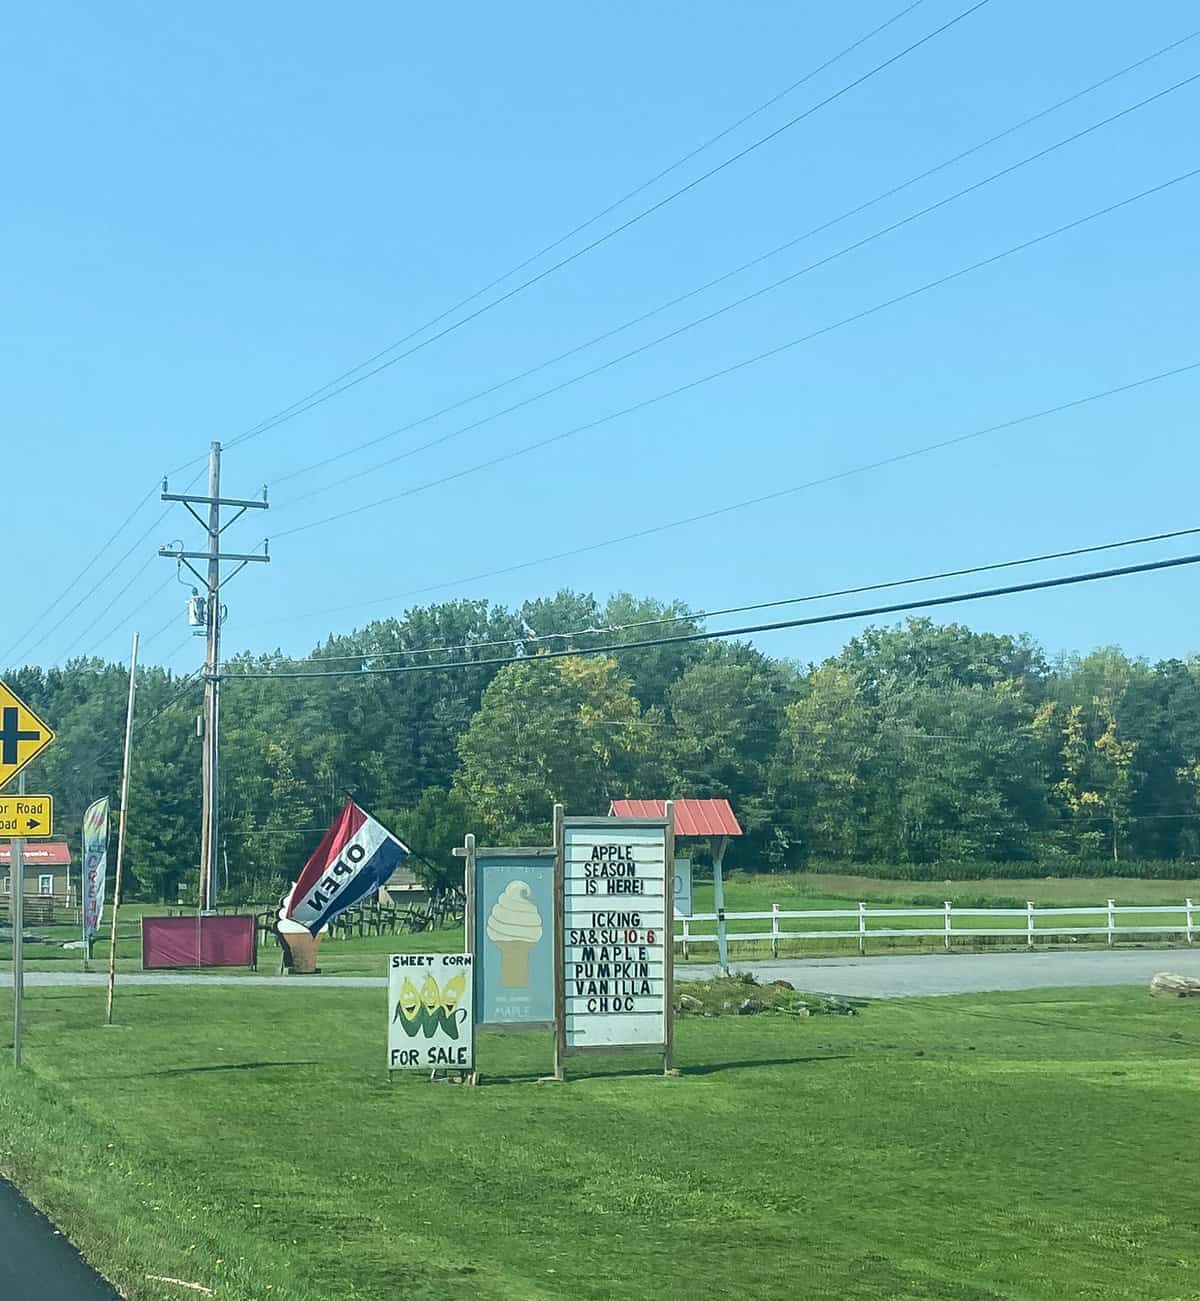 Roadside sign for apple picking and ice cream with "open" flag.